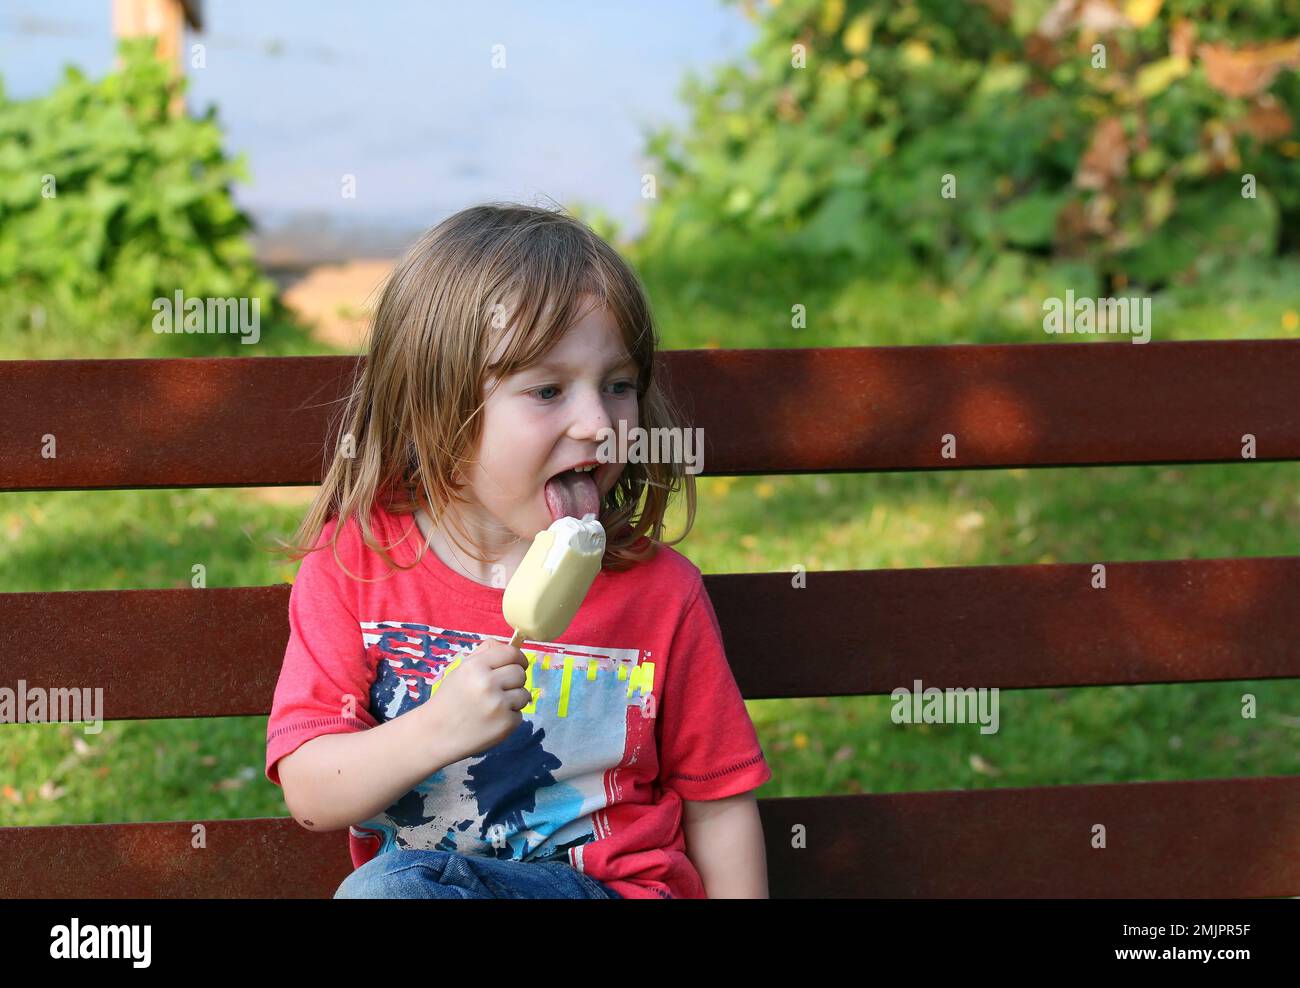 Young child happily eating an ice cream. Stock Photo